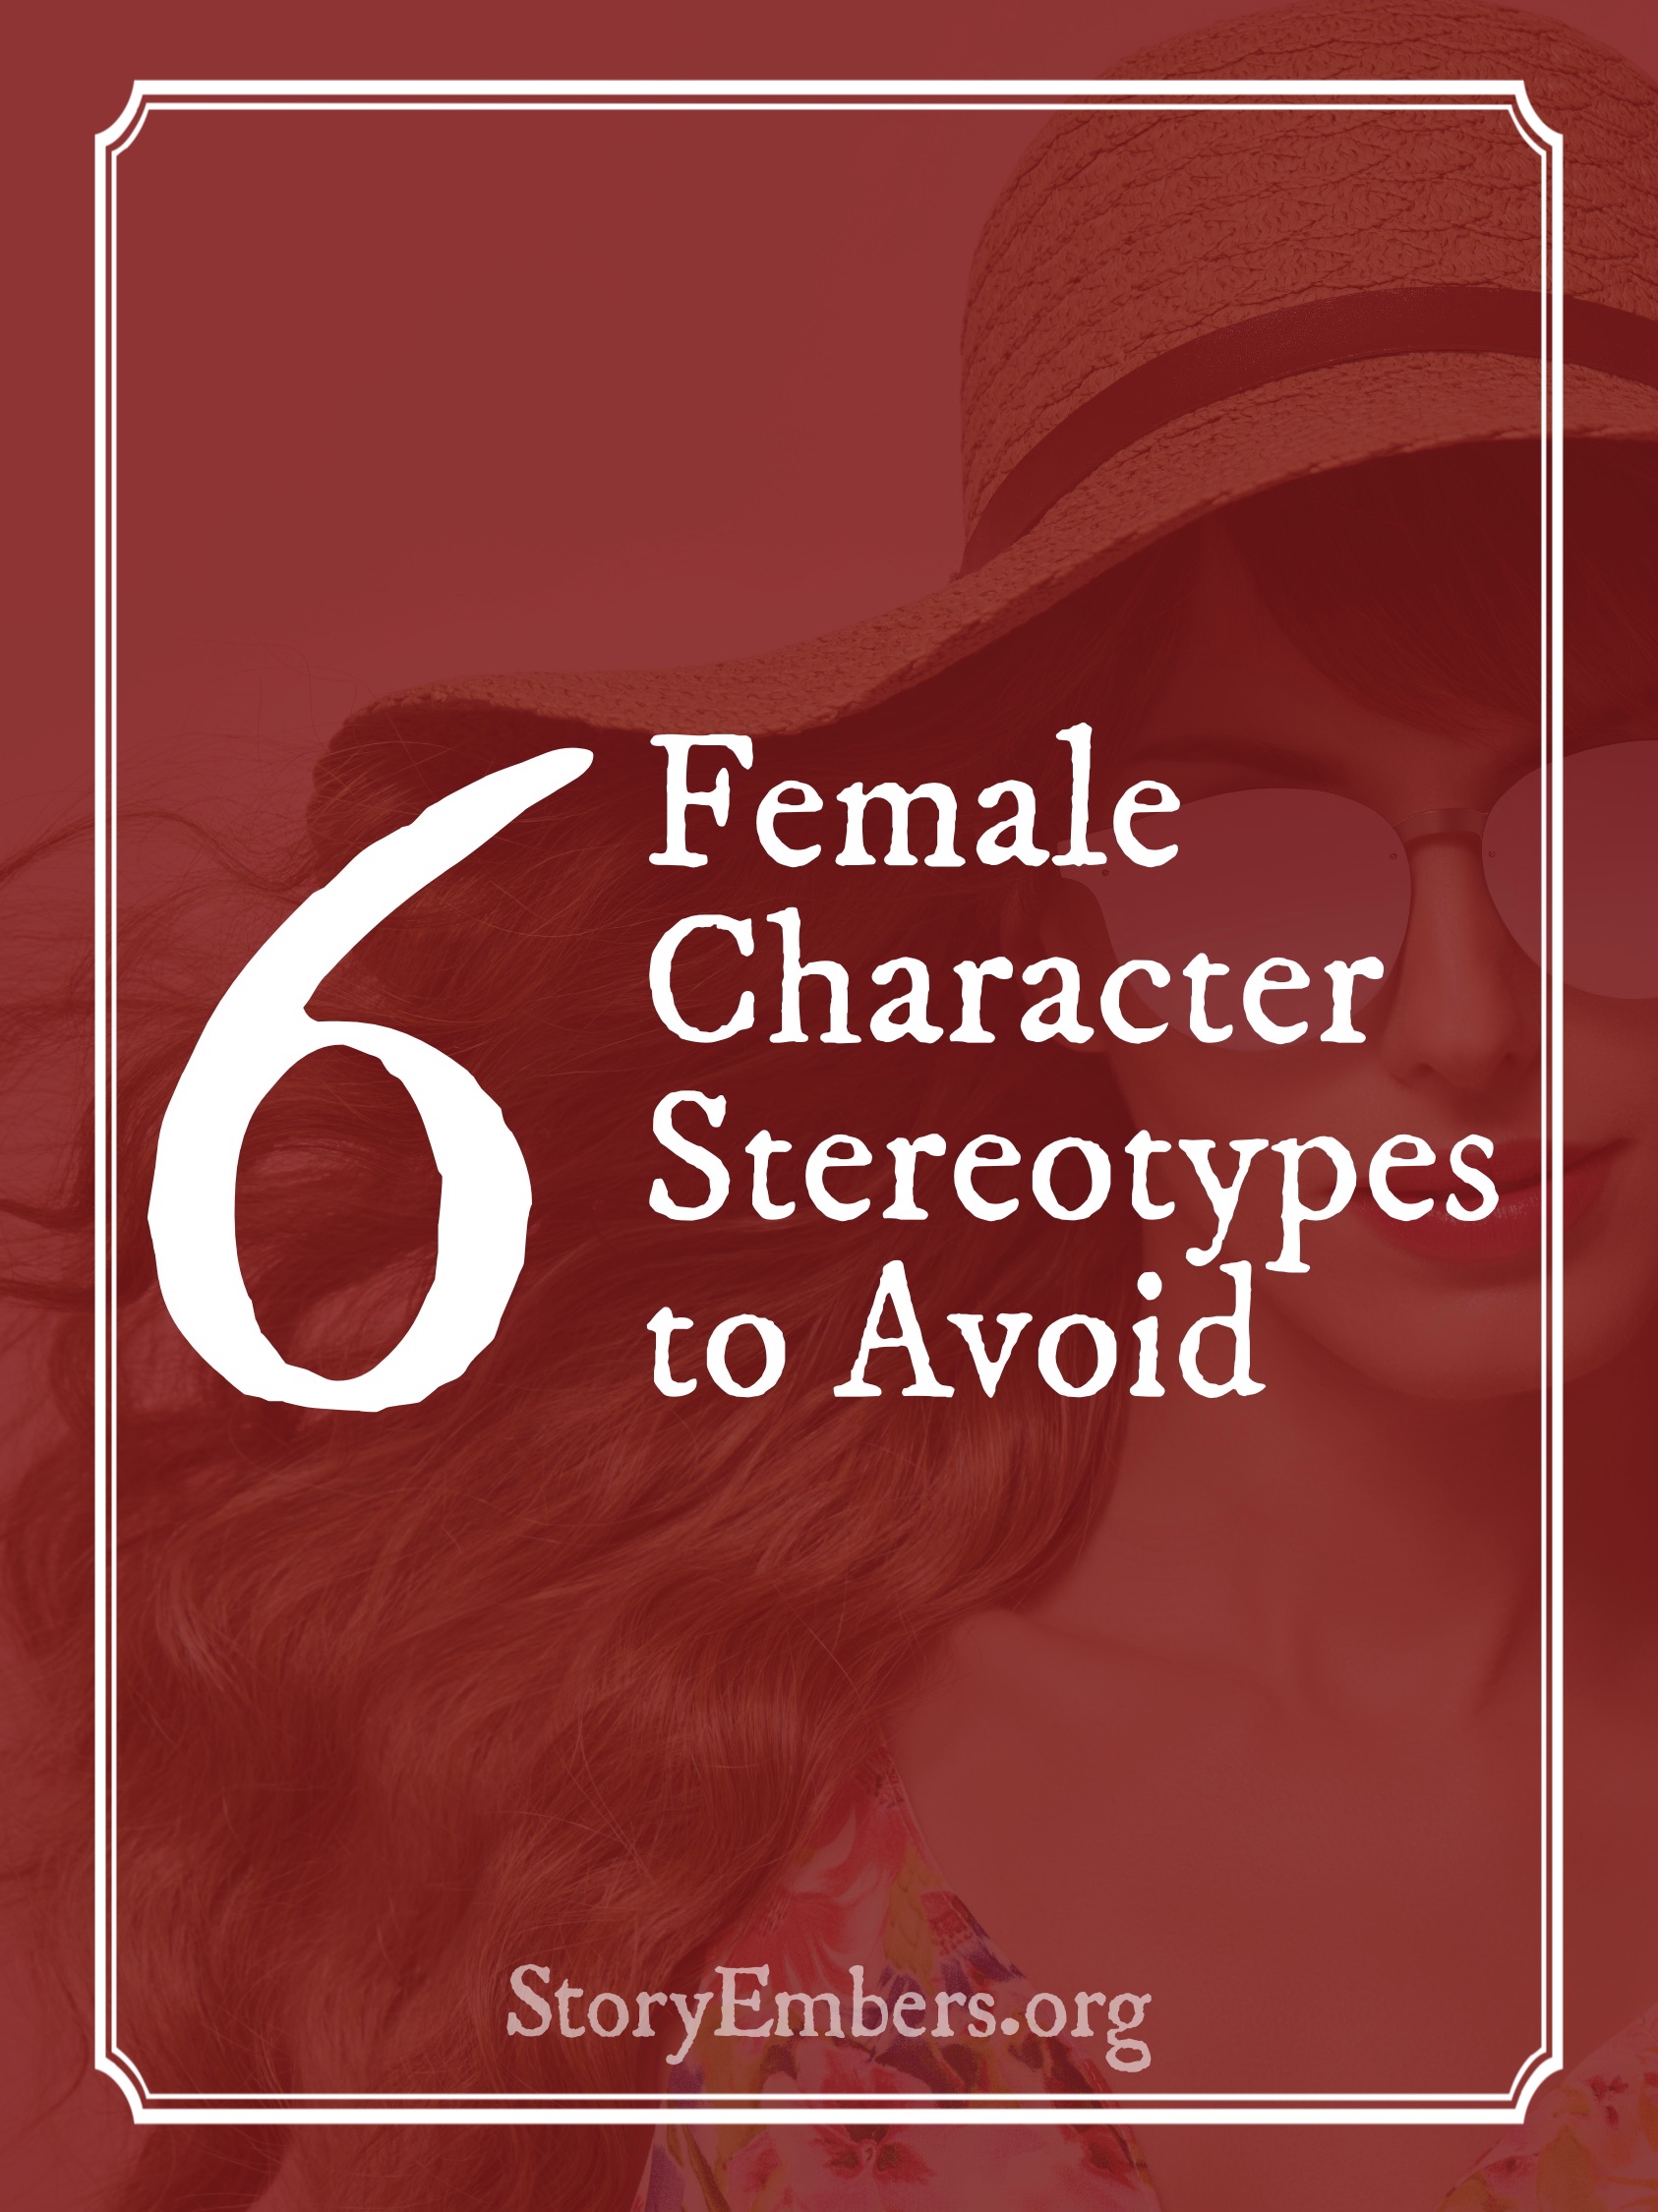 6 Female Character Stereotypes to Avoid